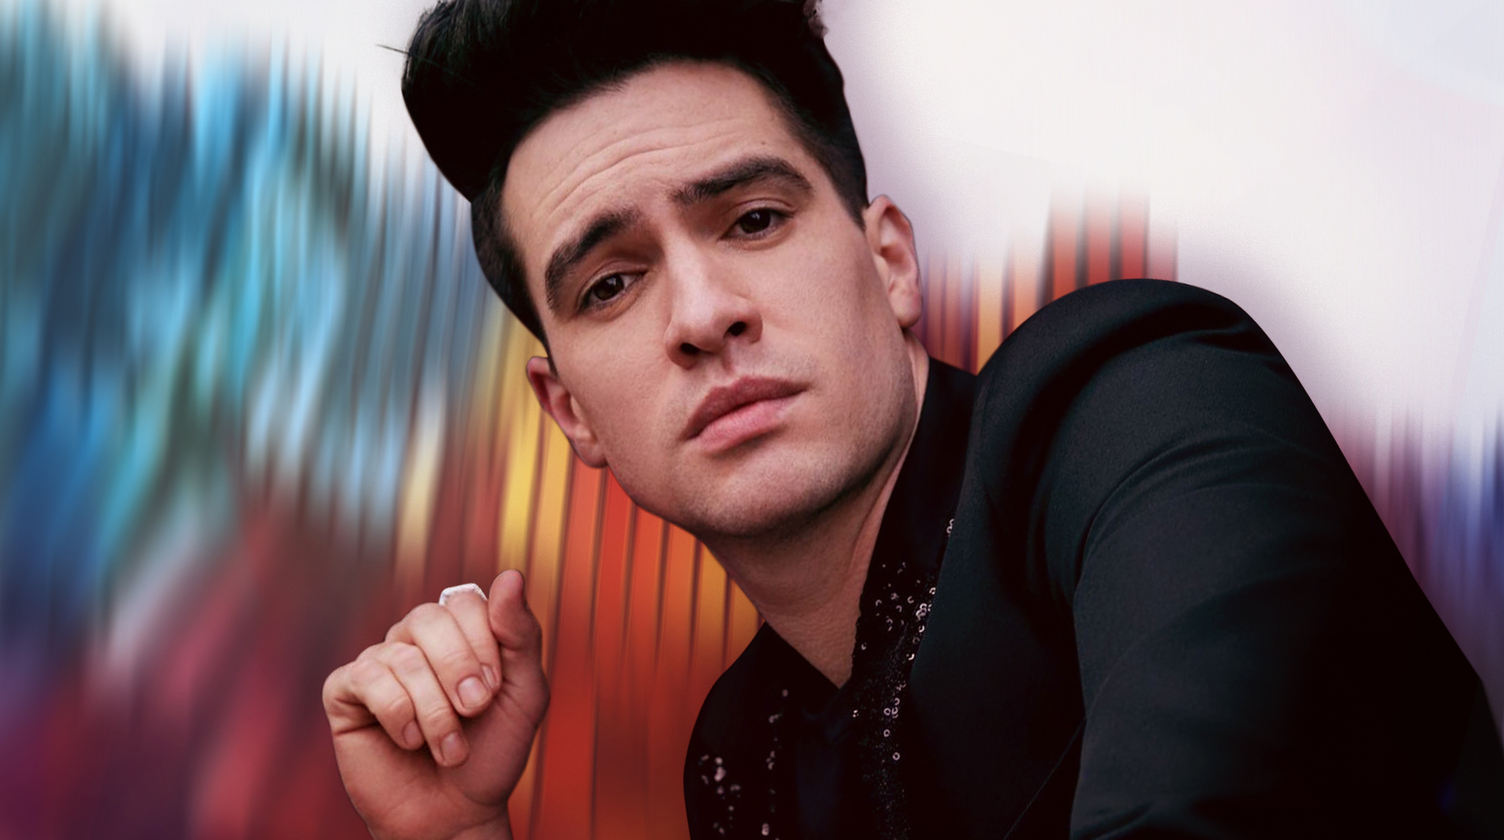 brendon-urie